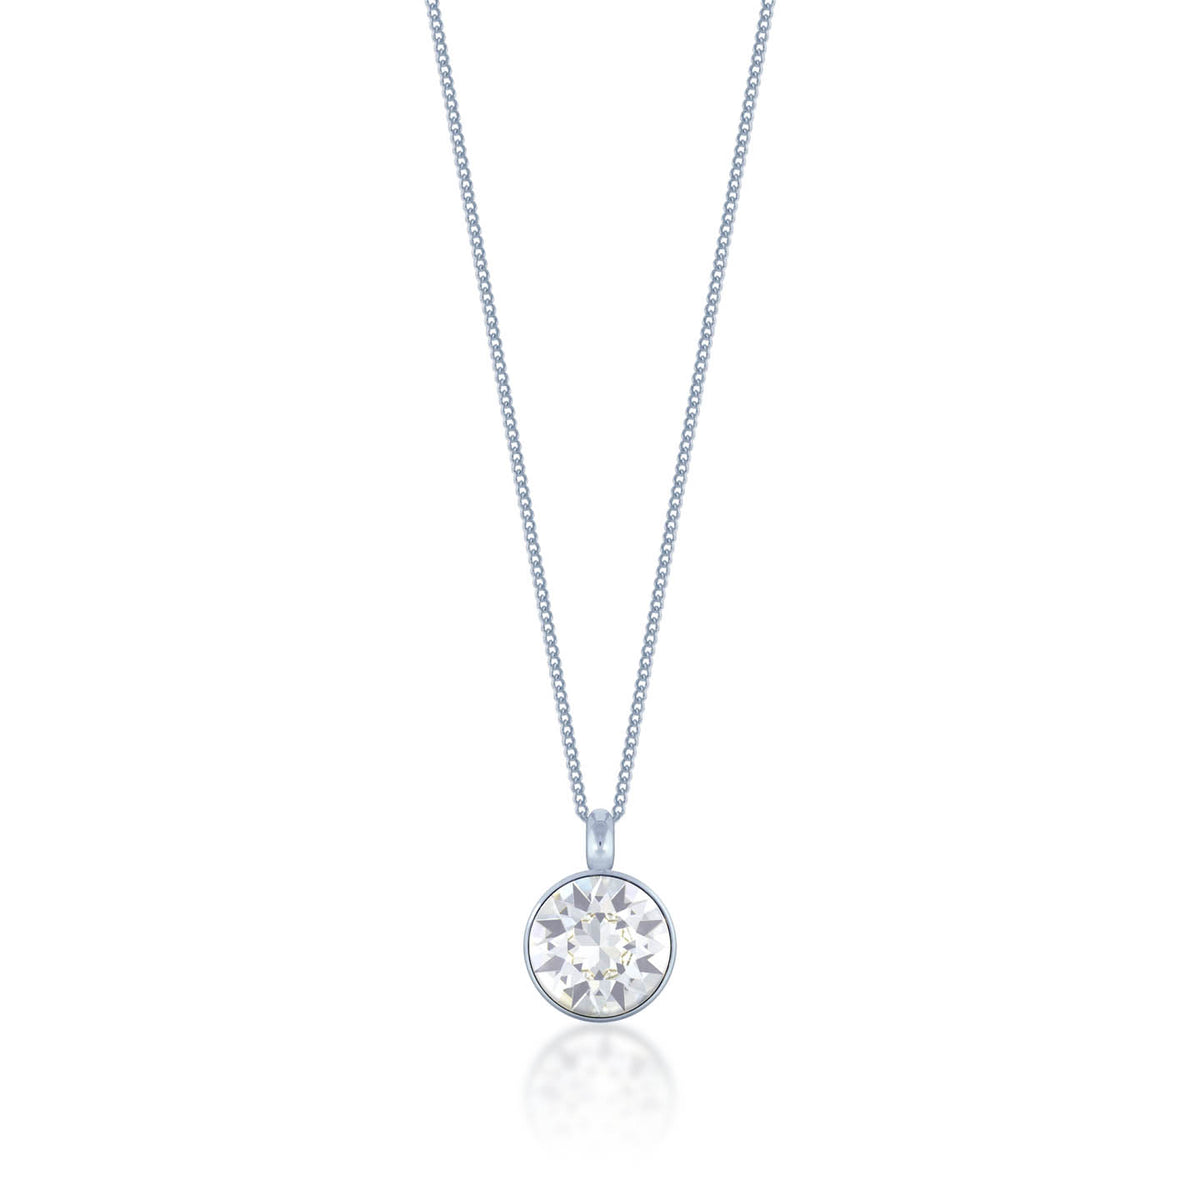 Bella Pendant Necklace with White Clear Round Crystals from Swarovski Silver Toned Rhodium Plated - Ed Heart